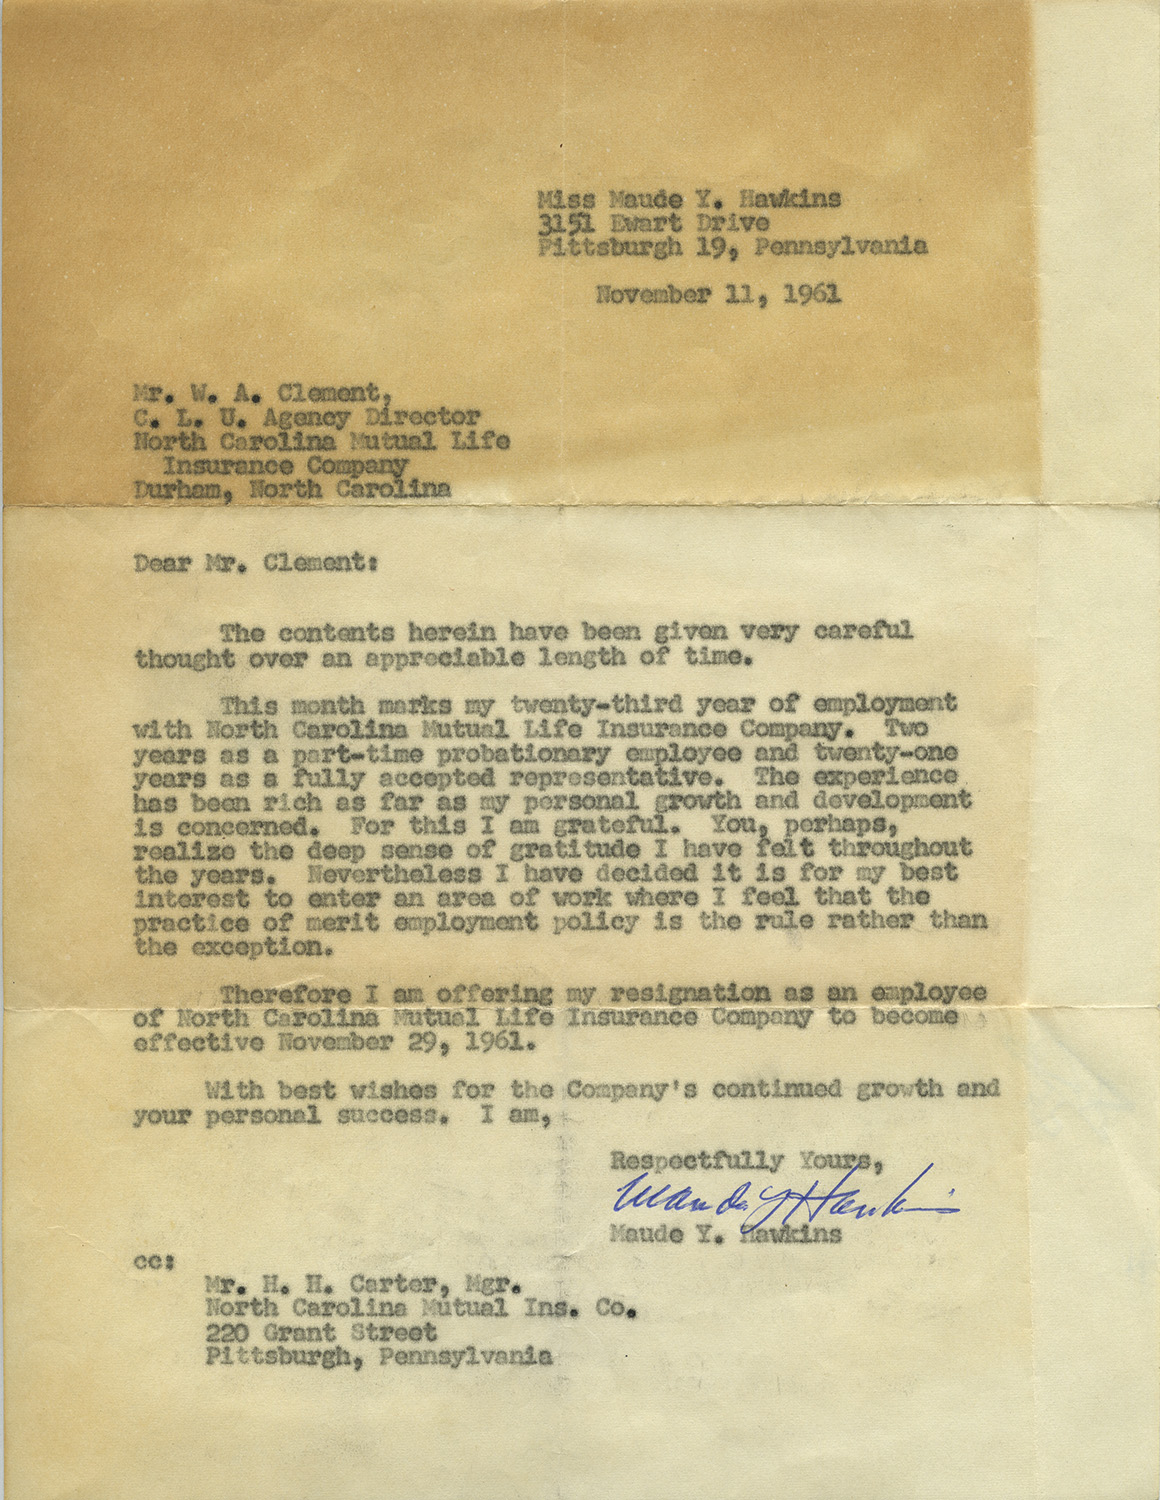 Maude Hawkins’ resignation letter from the North Carolina Mutual Life Insurance Company. Maude Y. Hawkins Papers, MSS 171, Detre Library & Archives at the History Center.